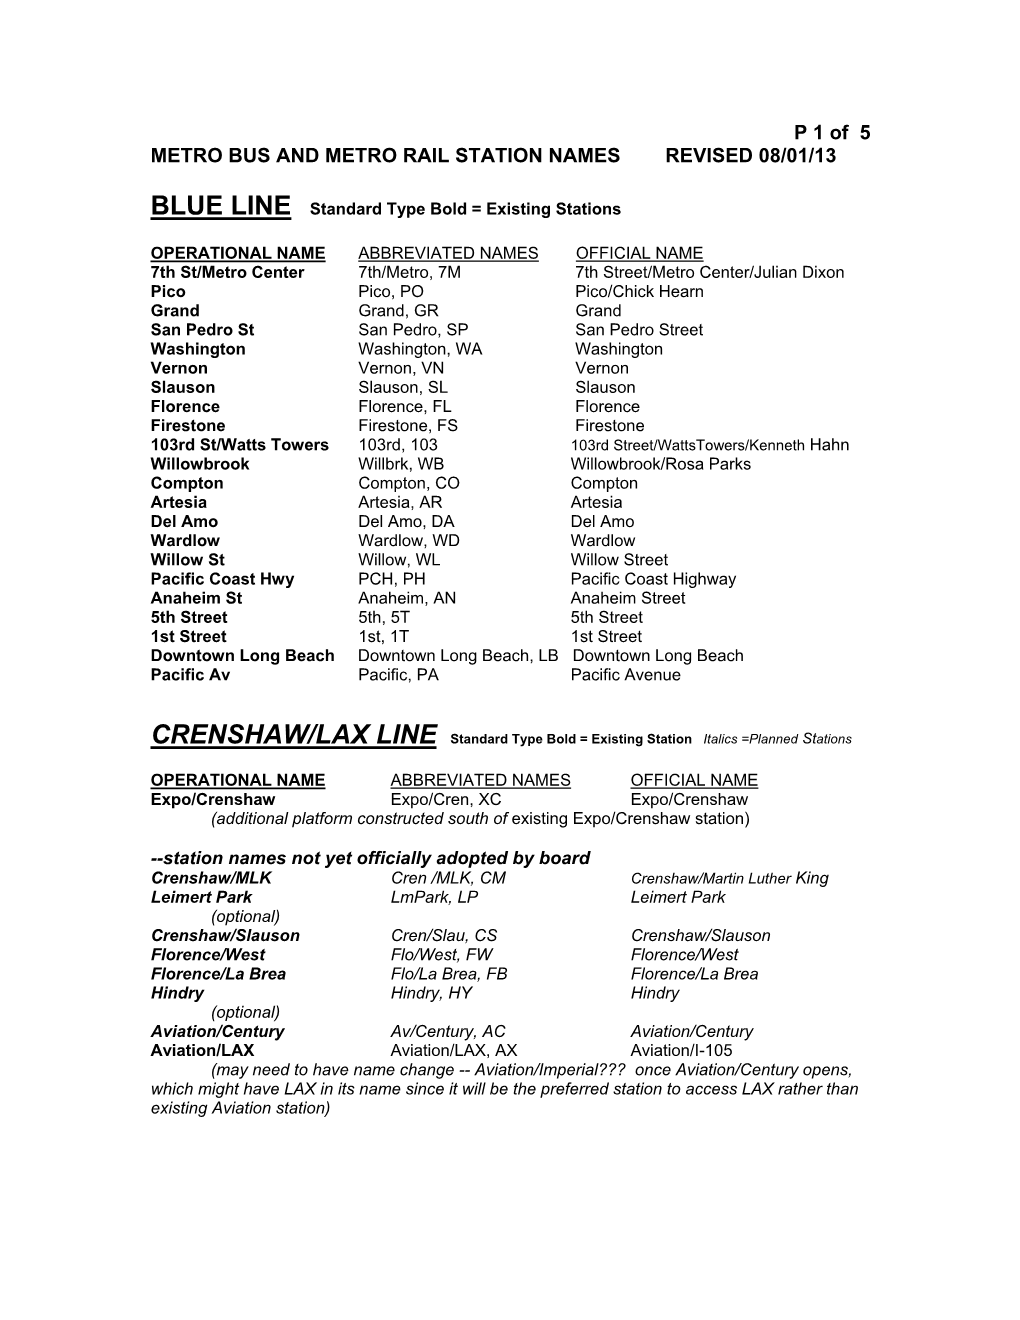 P 1 of 5 METRO BUS and METRO RAIL STATION NAMES REVISED 08/01/13